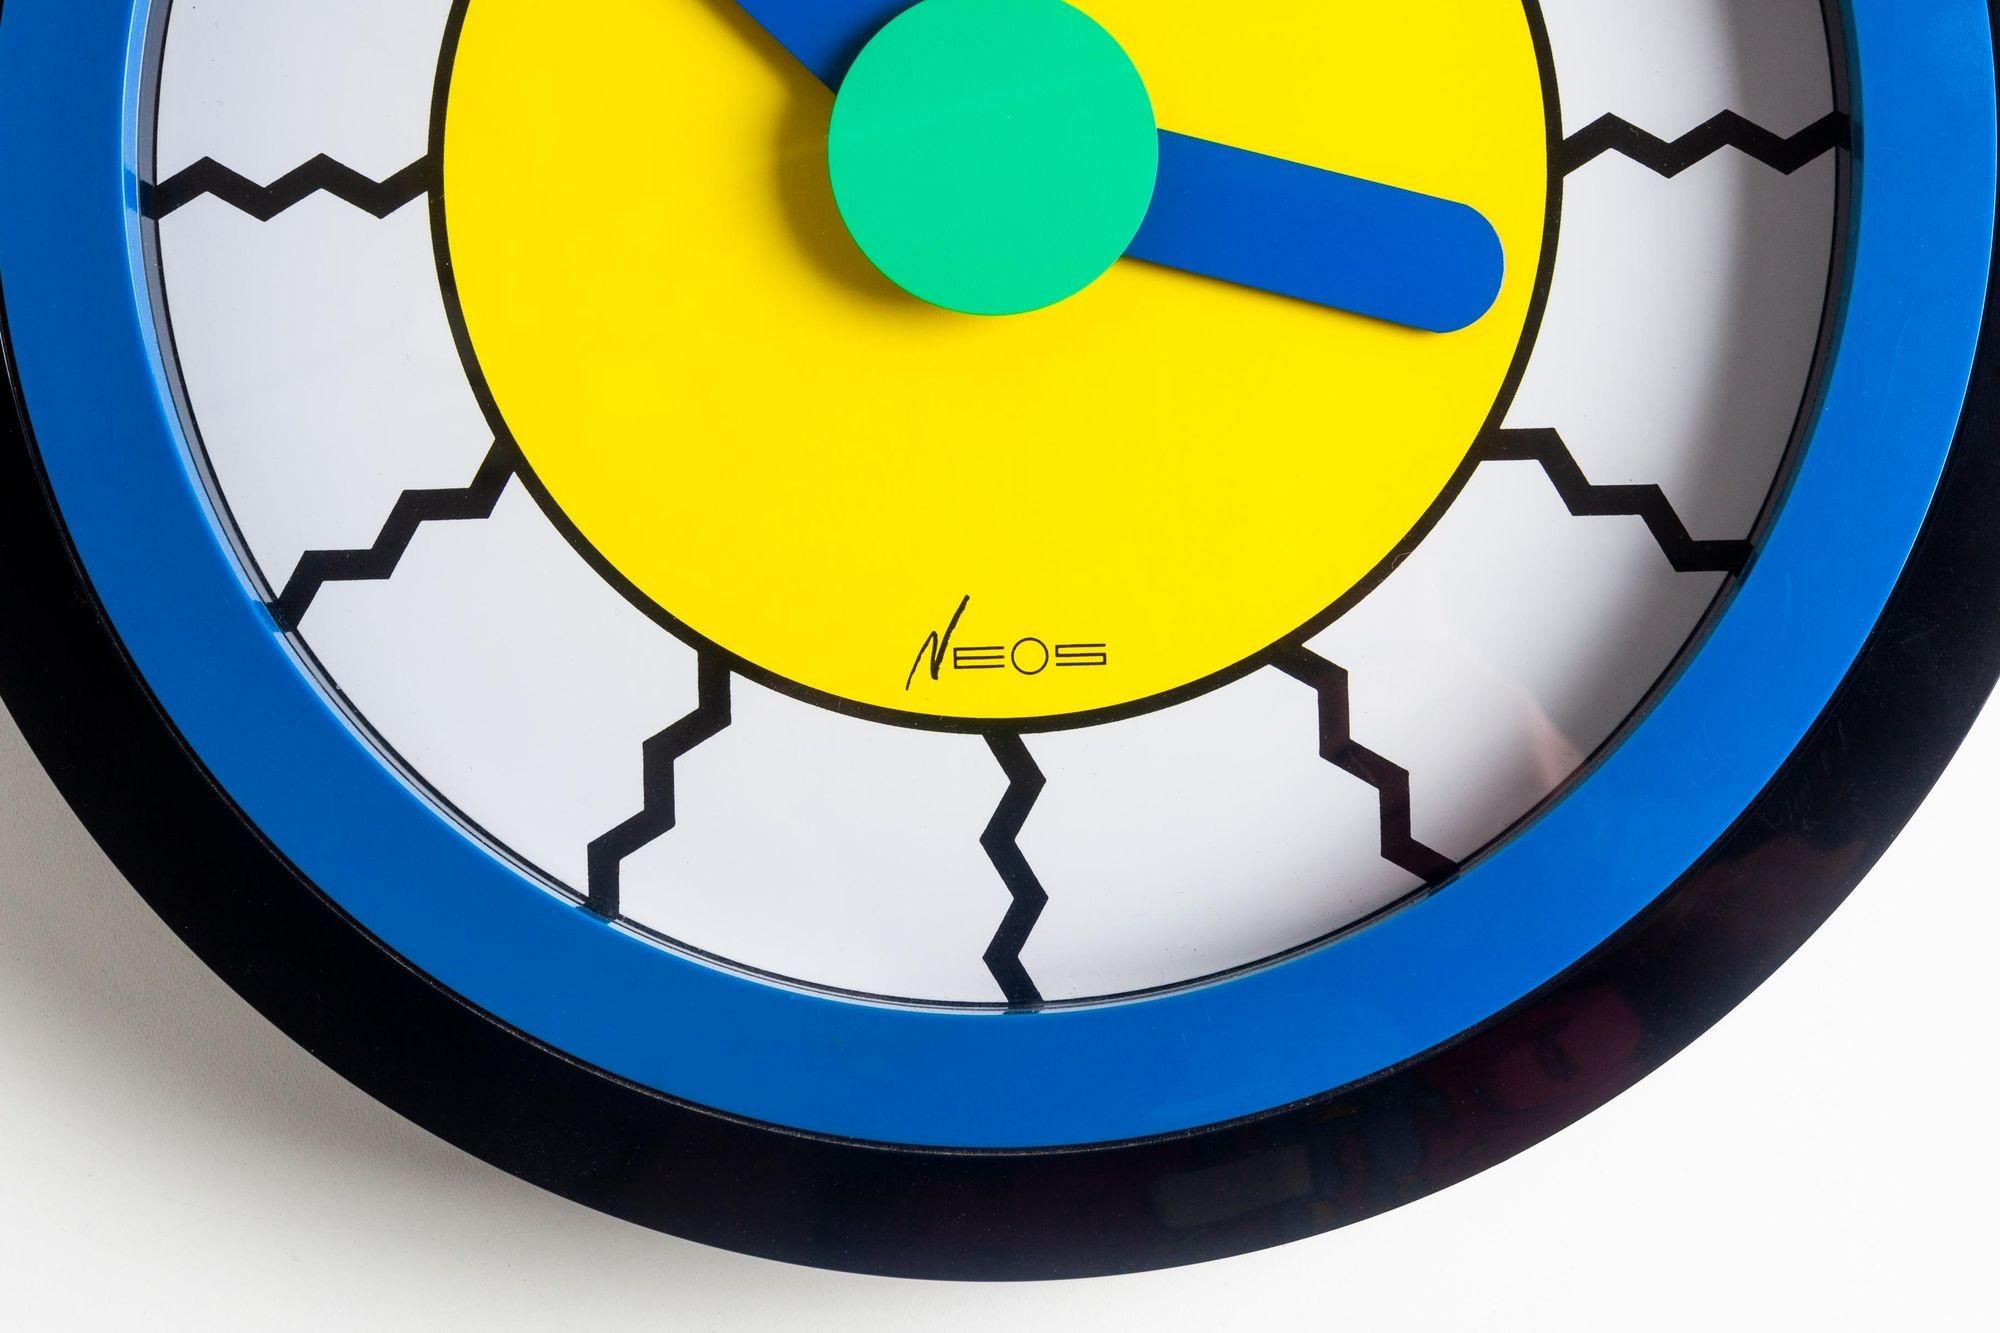 A bright, multicolored postmodern wall clock with blue and green hands designed by Nathalie du Pasquier and George Sowden for Neos of Lorenz in the late 1980s. Co-founders of the Memphis Group, du Pasquier and Sowden designed numerous clocks for